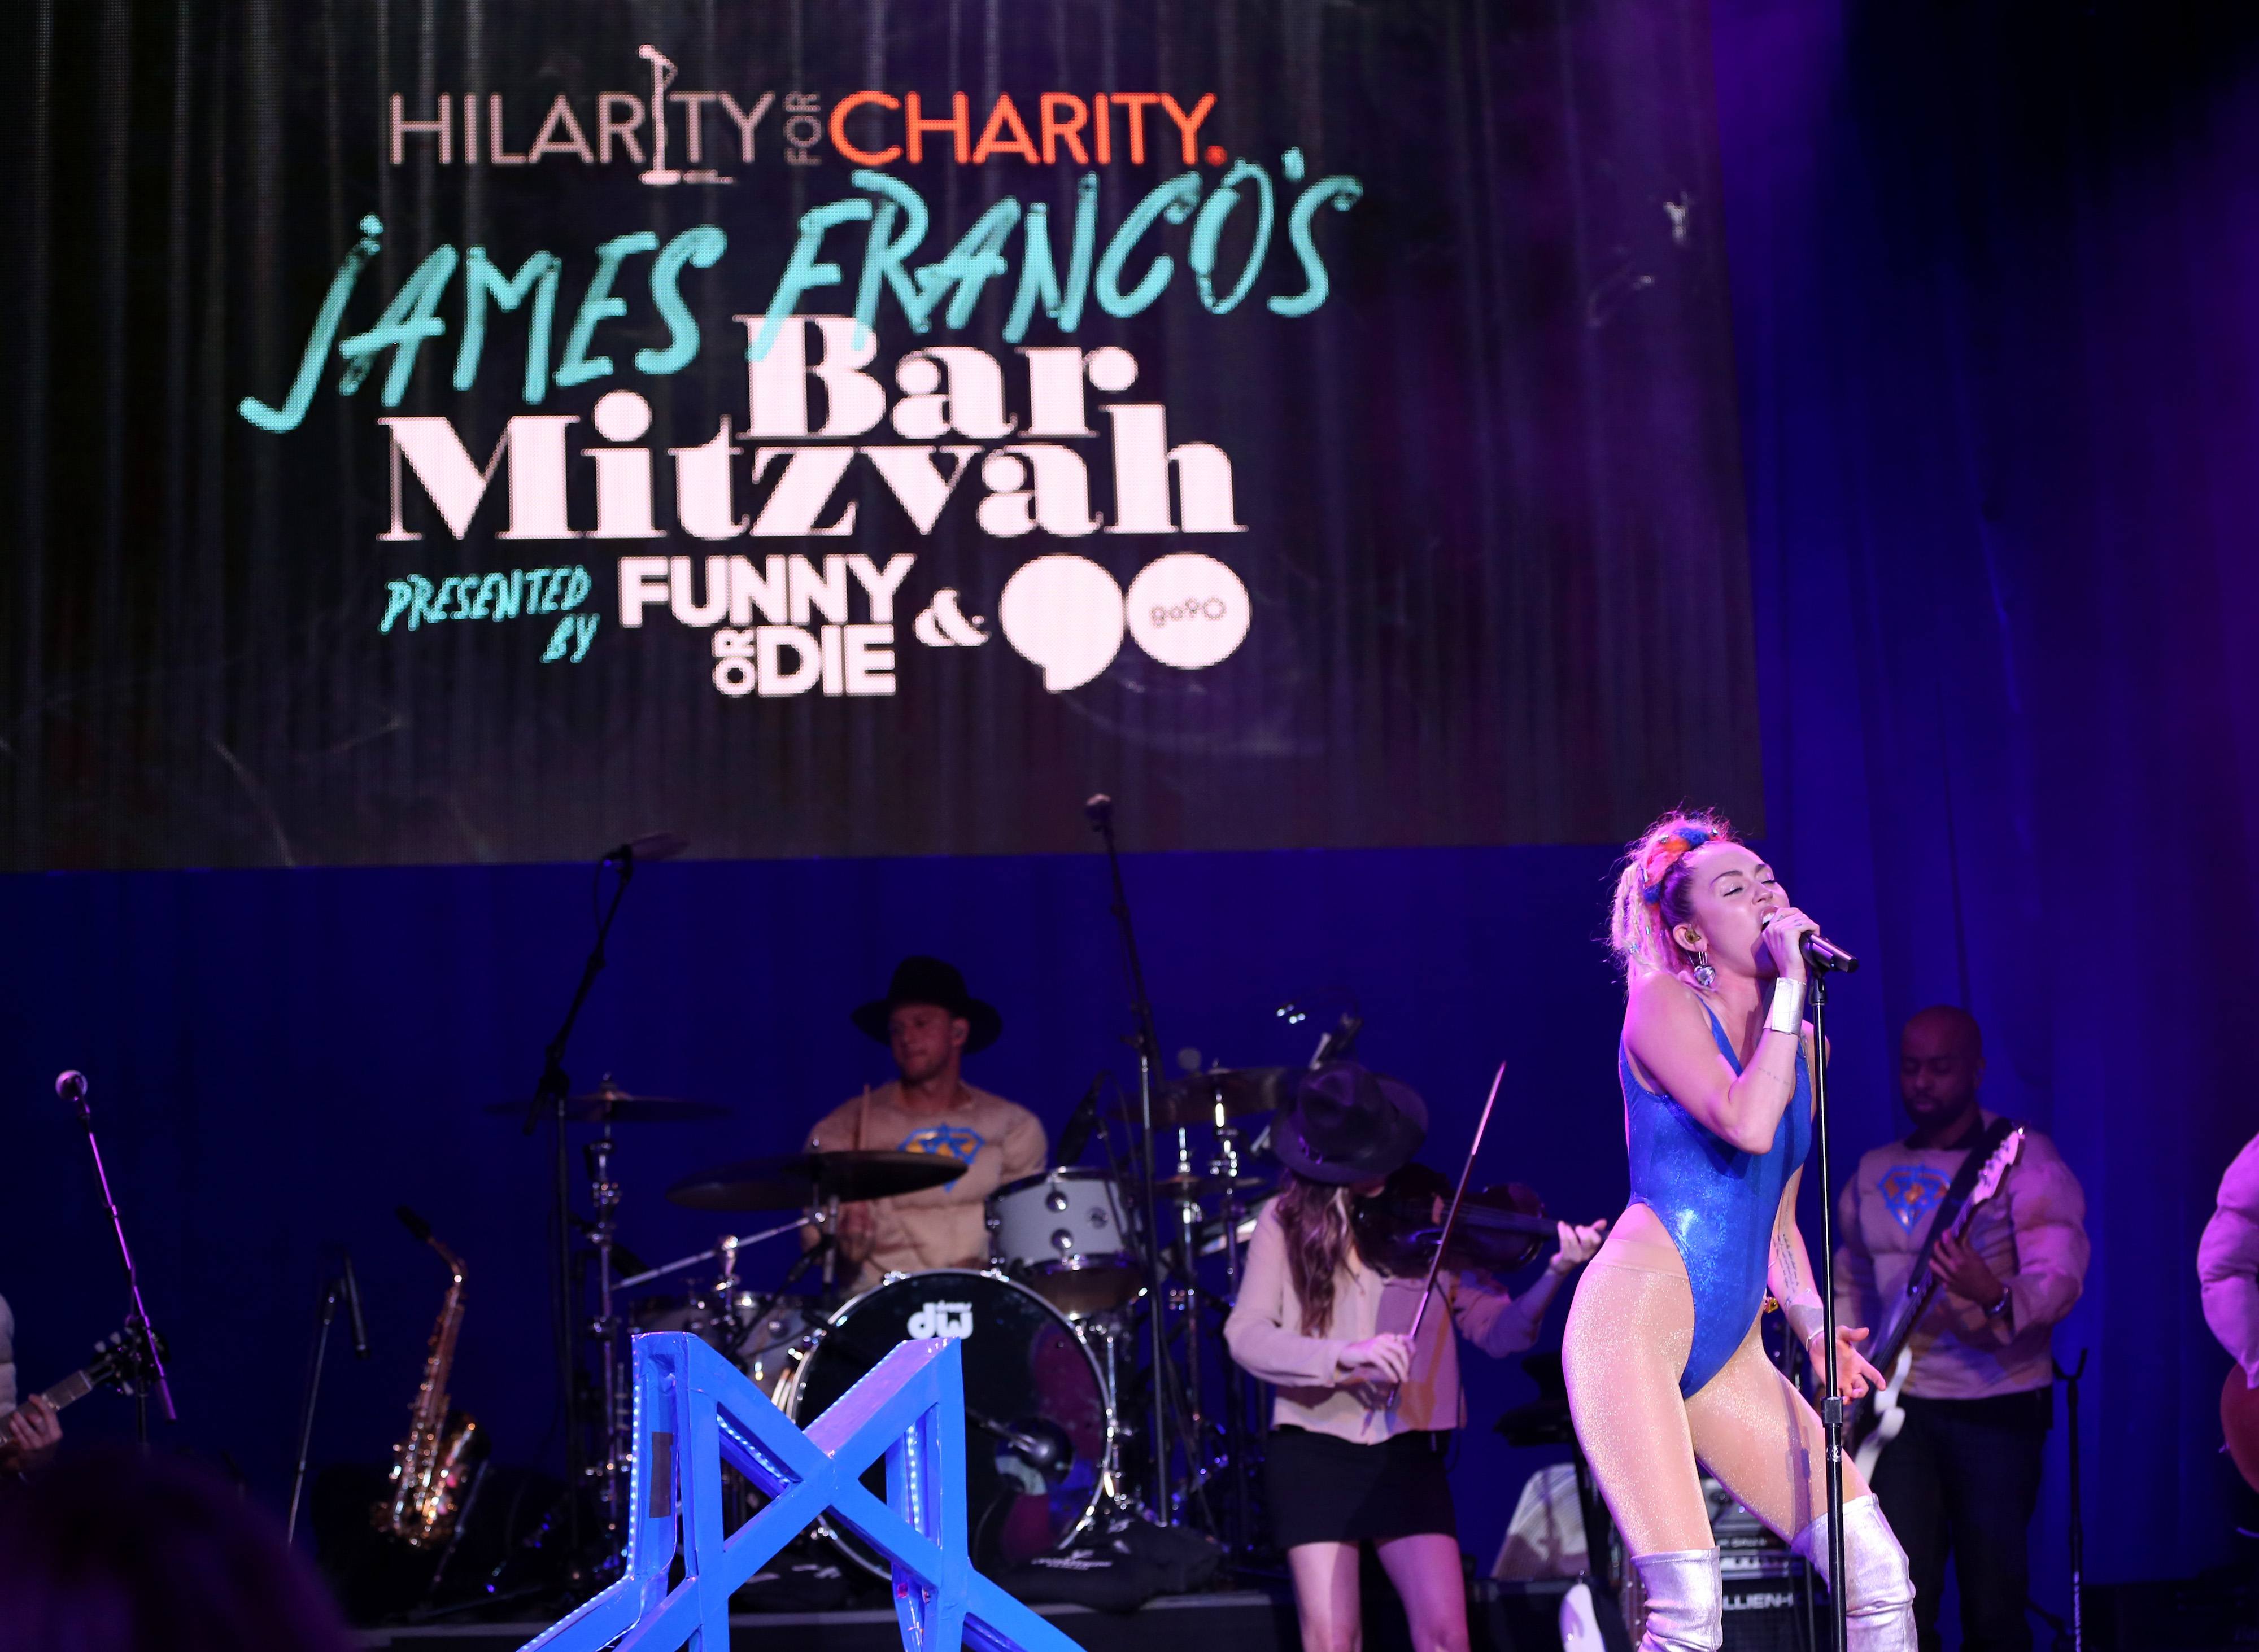 Hilarity For Charity's Annual Variety Show: James Franco's Bar Mitzvah Benefiting The Alzheimer's Association Presented By Funny Or Die And go90 With Sponsor SVEDKA Vodka